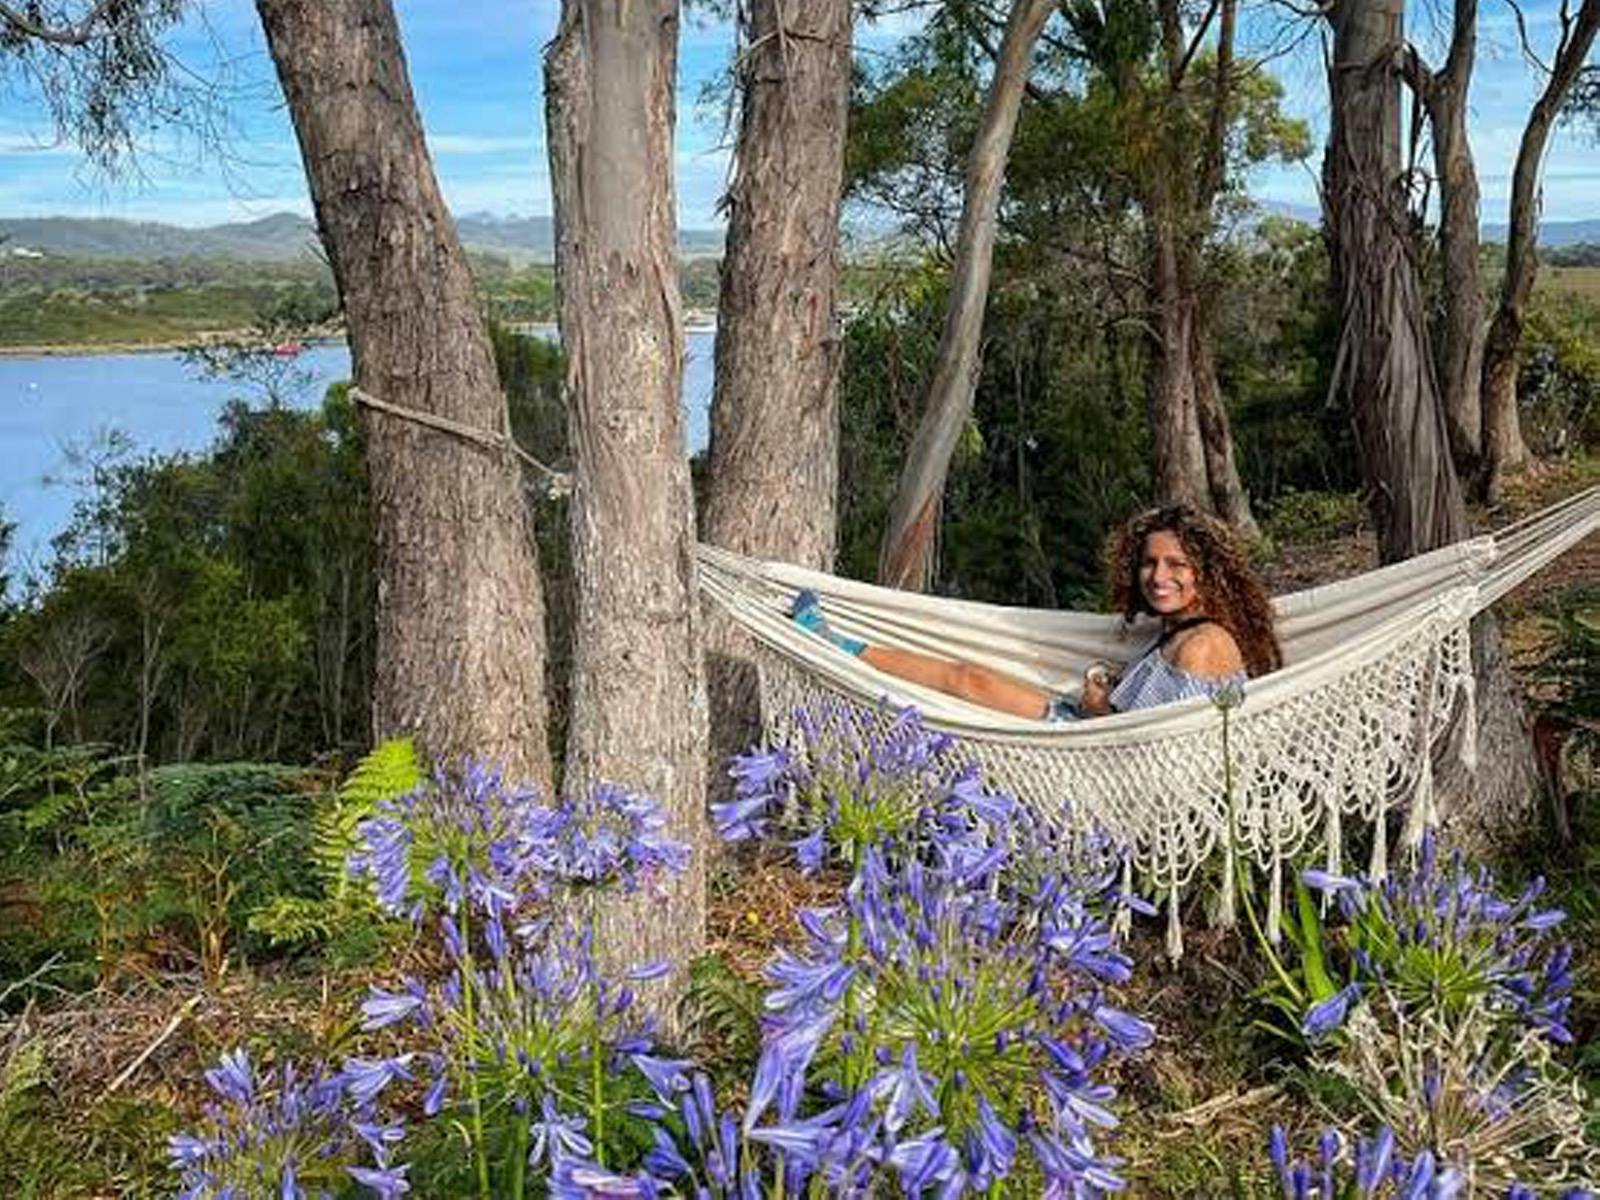 Find a place to relax surrounded by nature, like a hammock in the trees overlooking the harbour.